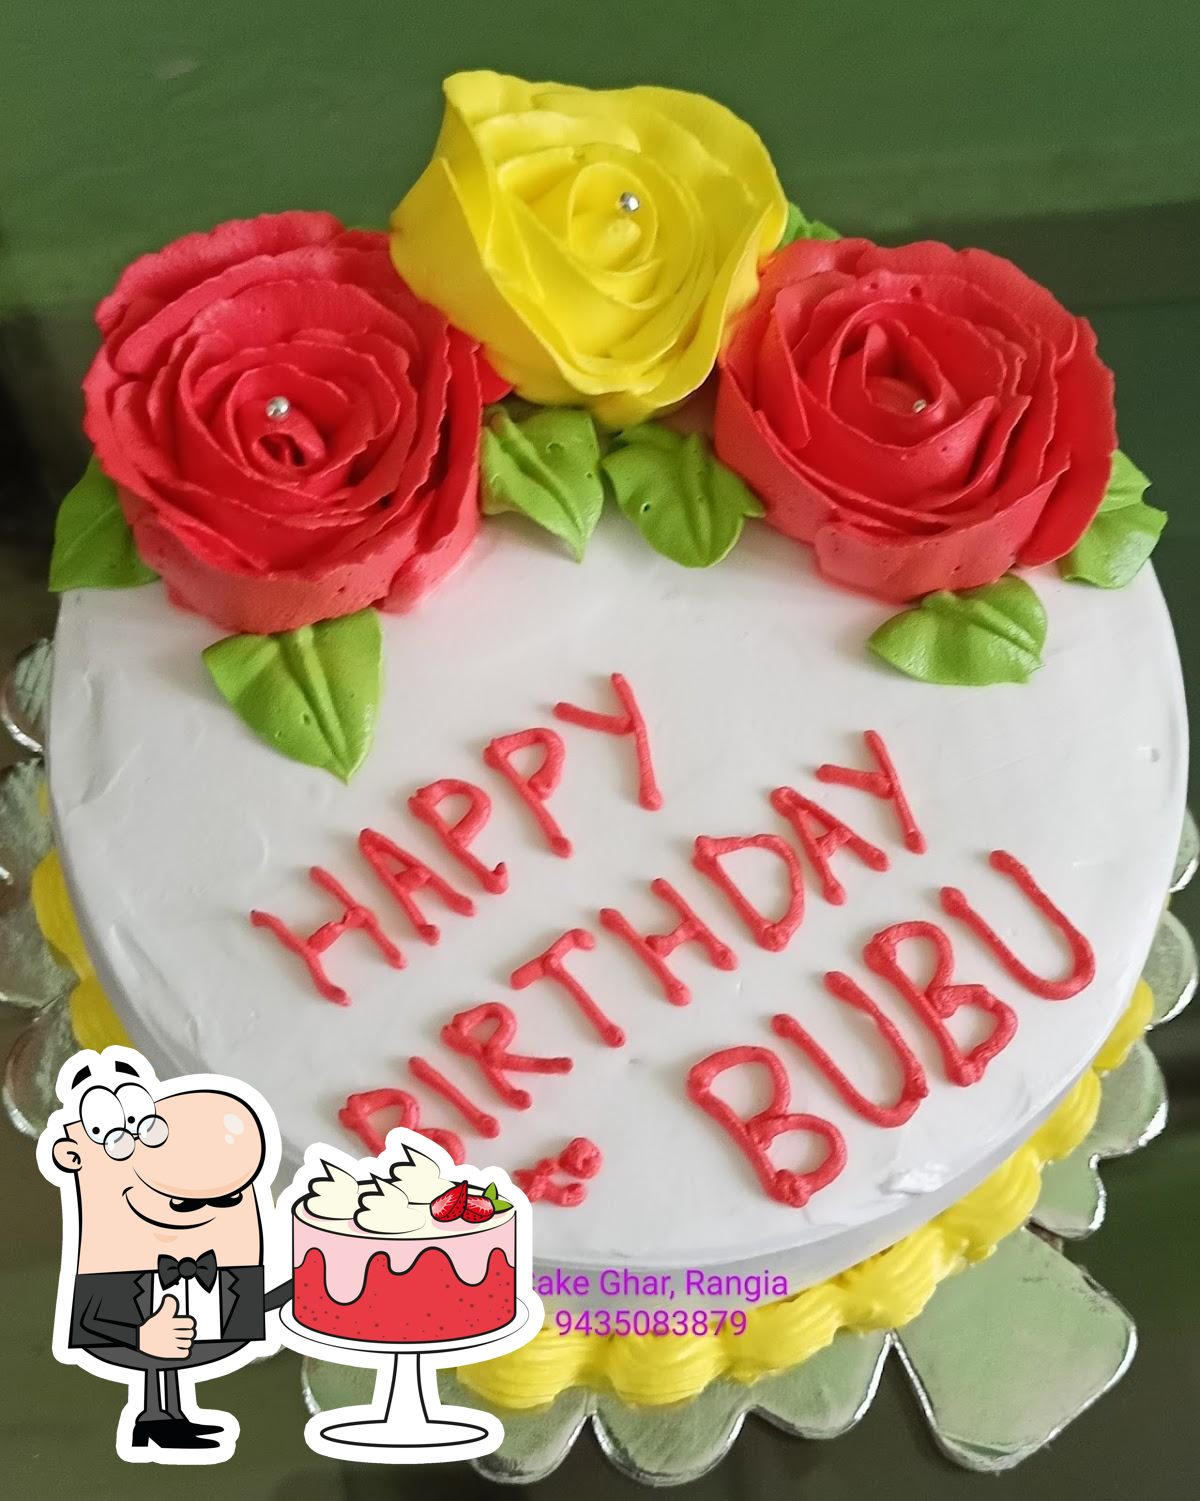 SEND CAKES TO BALI - CAKE DELIVERY IN BALI